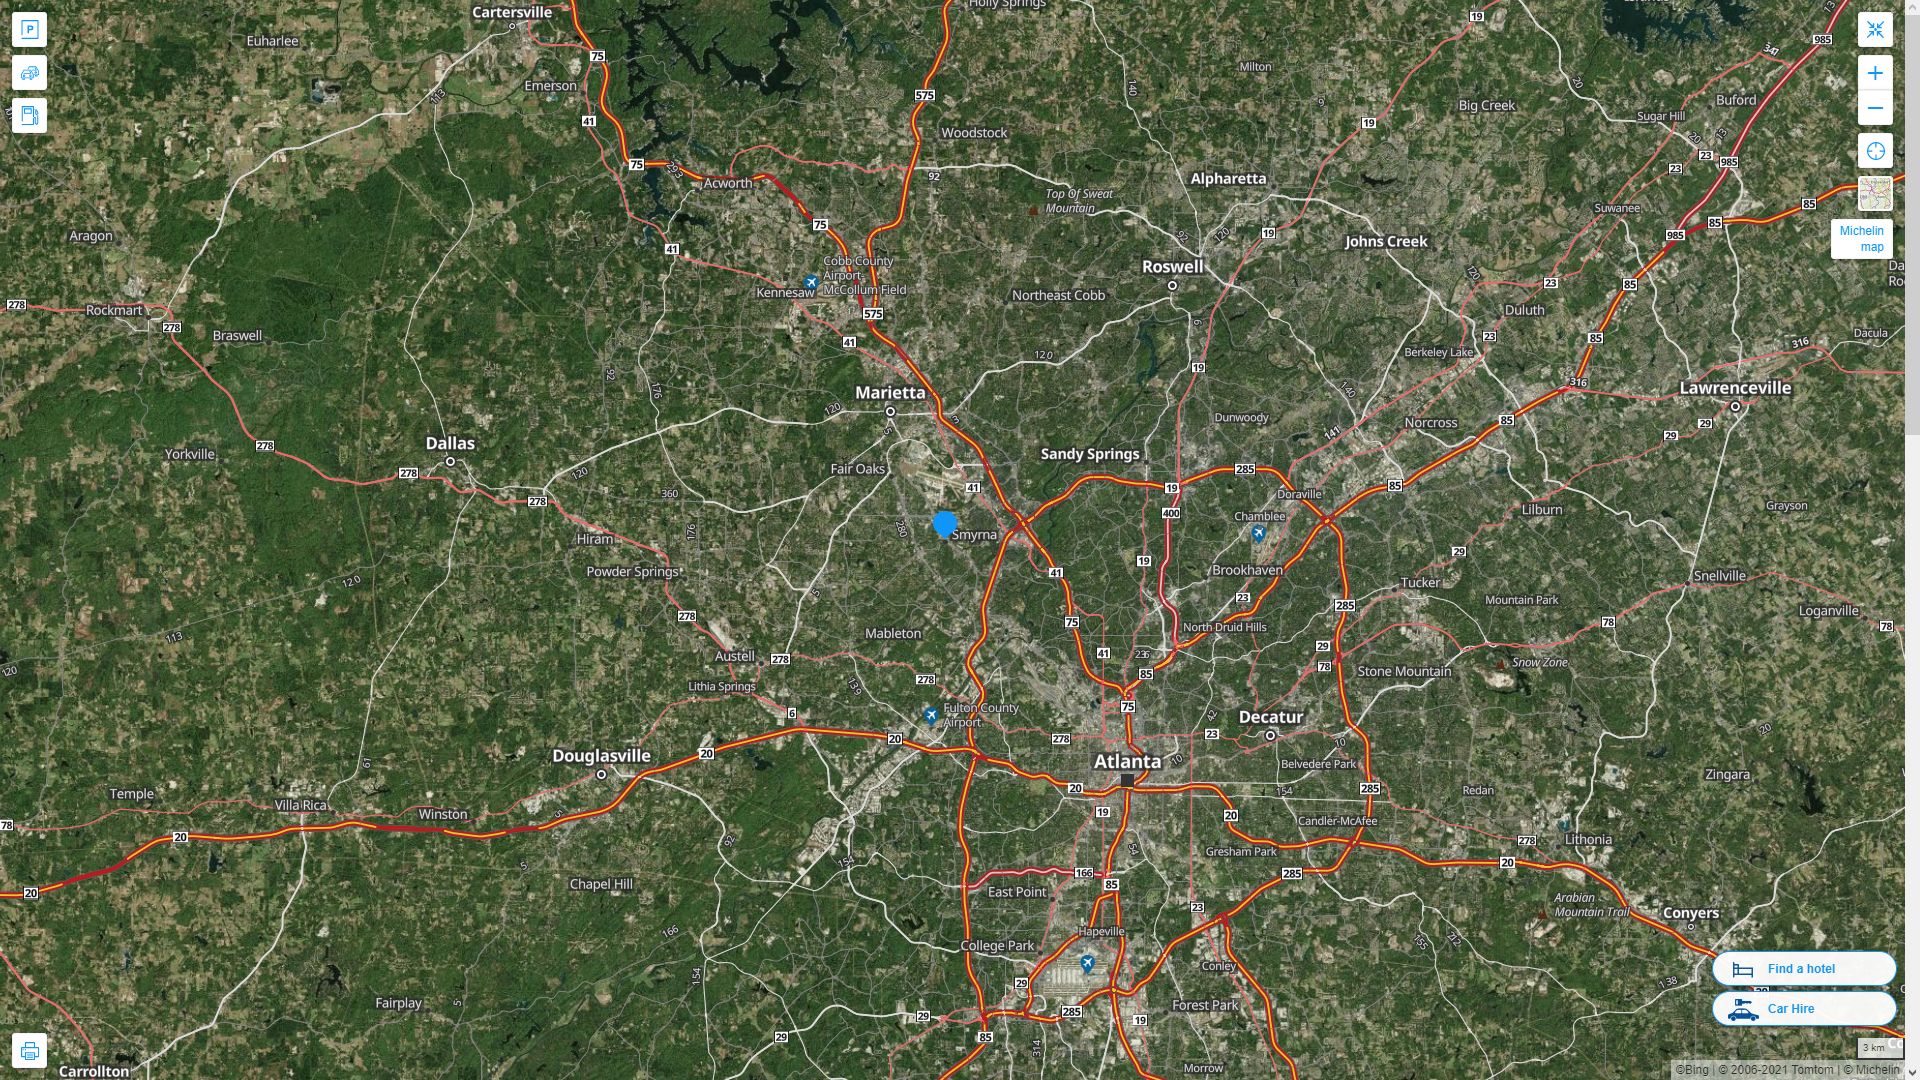 Smyrna Georgia Highway and Road Map with Satellite View